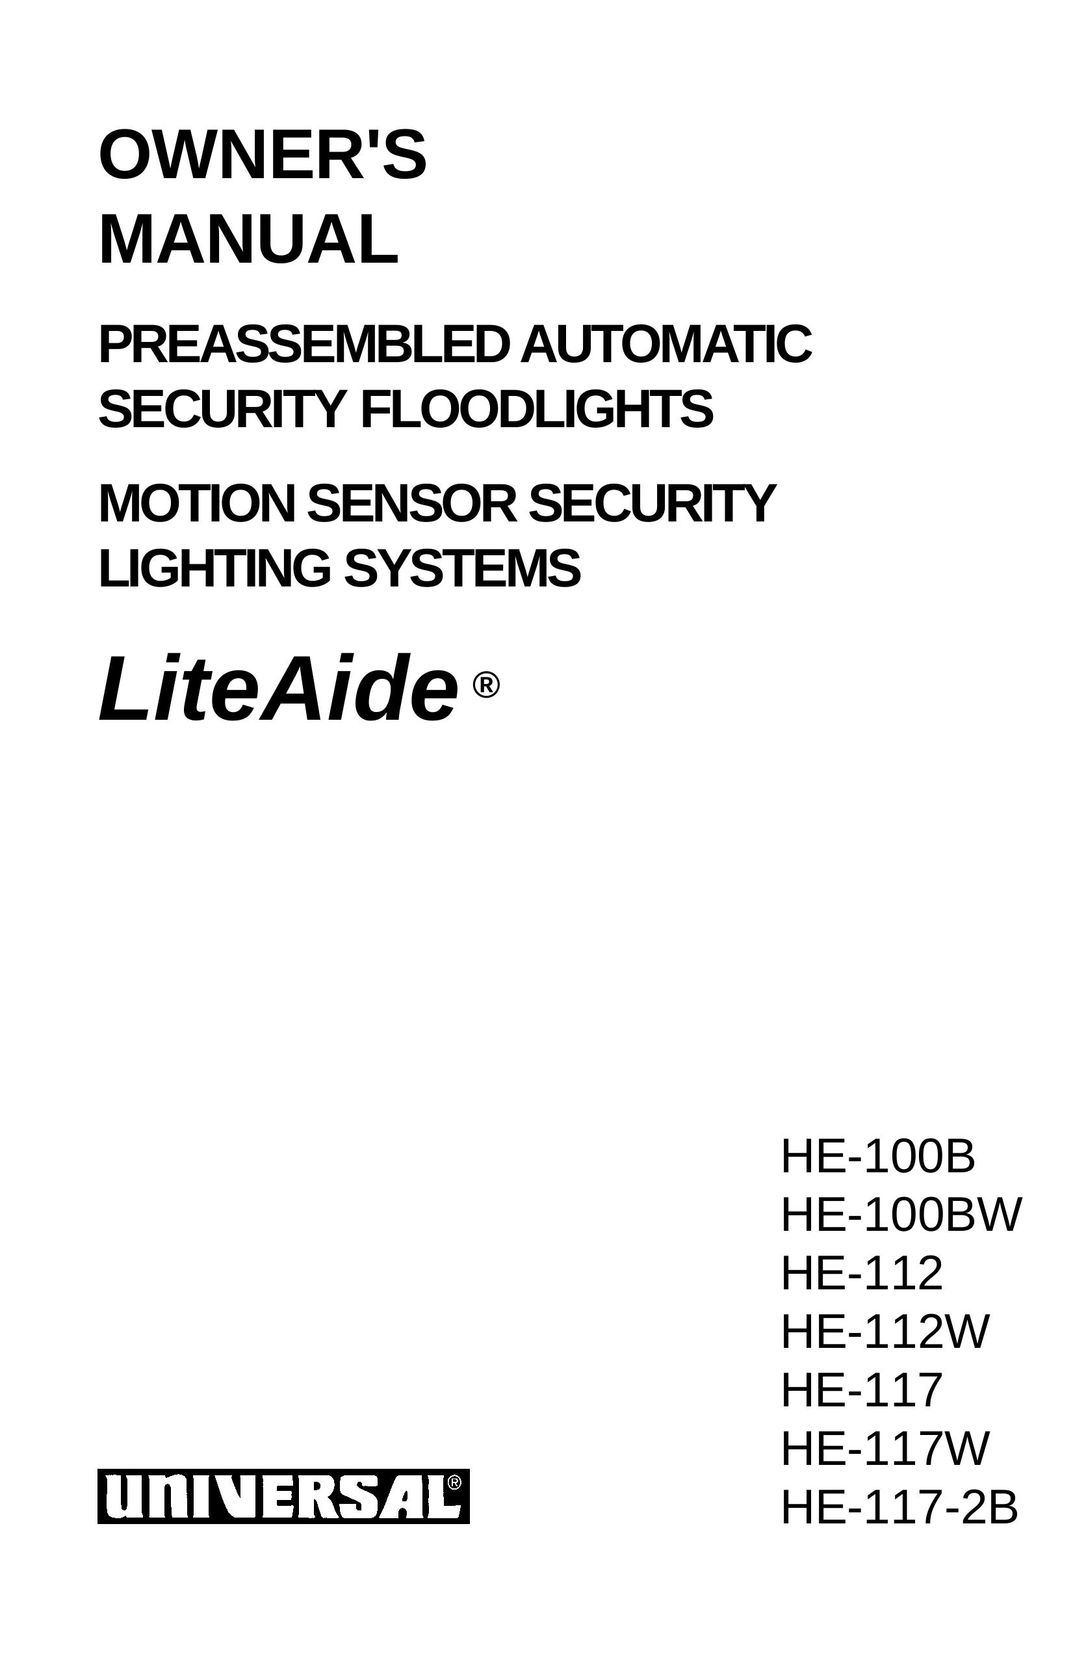 Universal HE-117 Home Security System User Manual